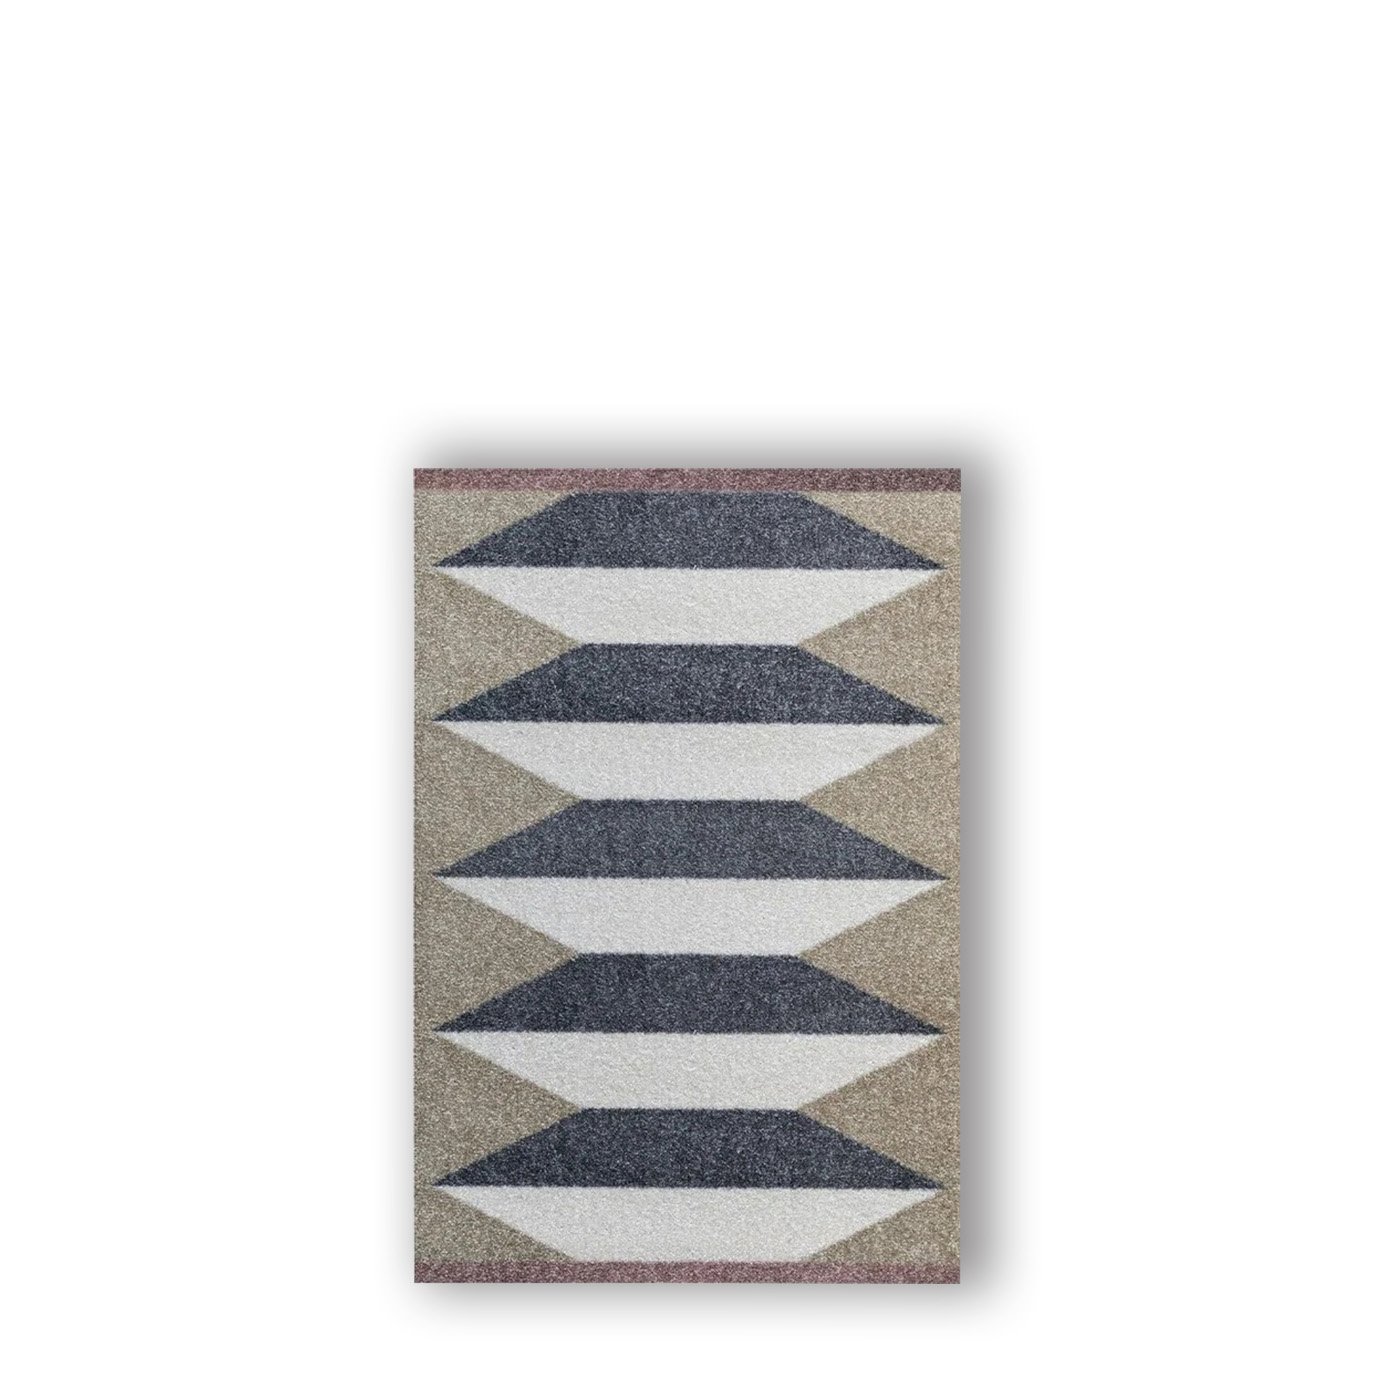 Mette Ditmer - ACCORDION all-round mat, small